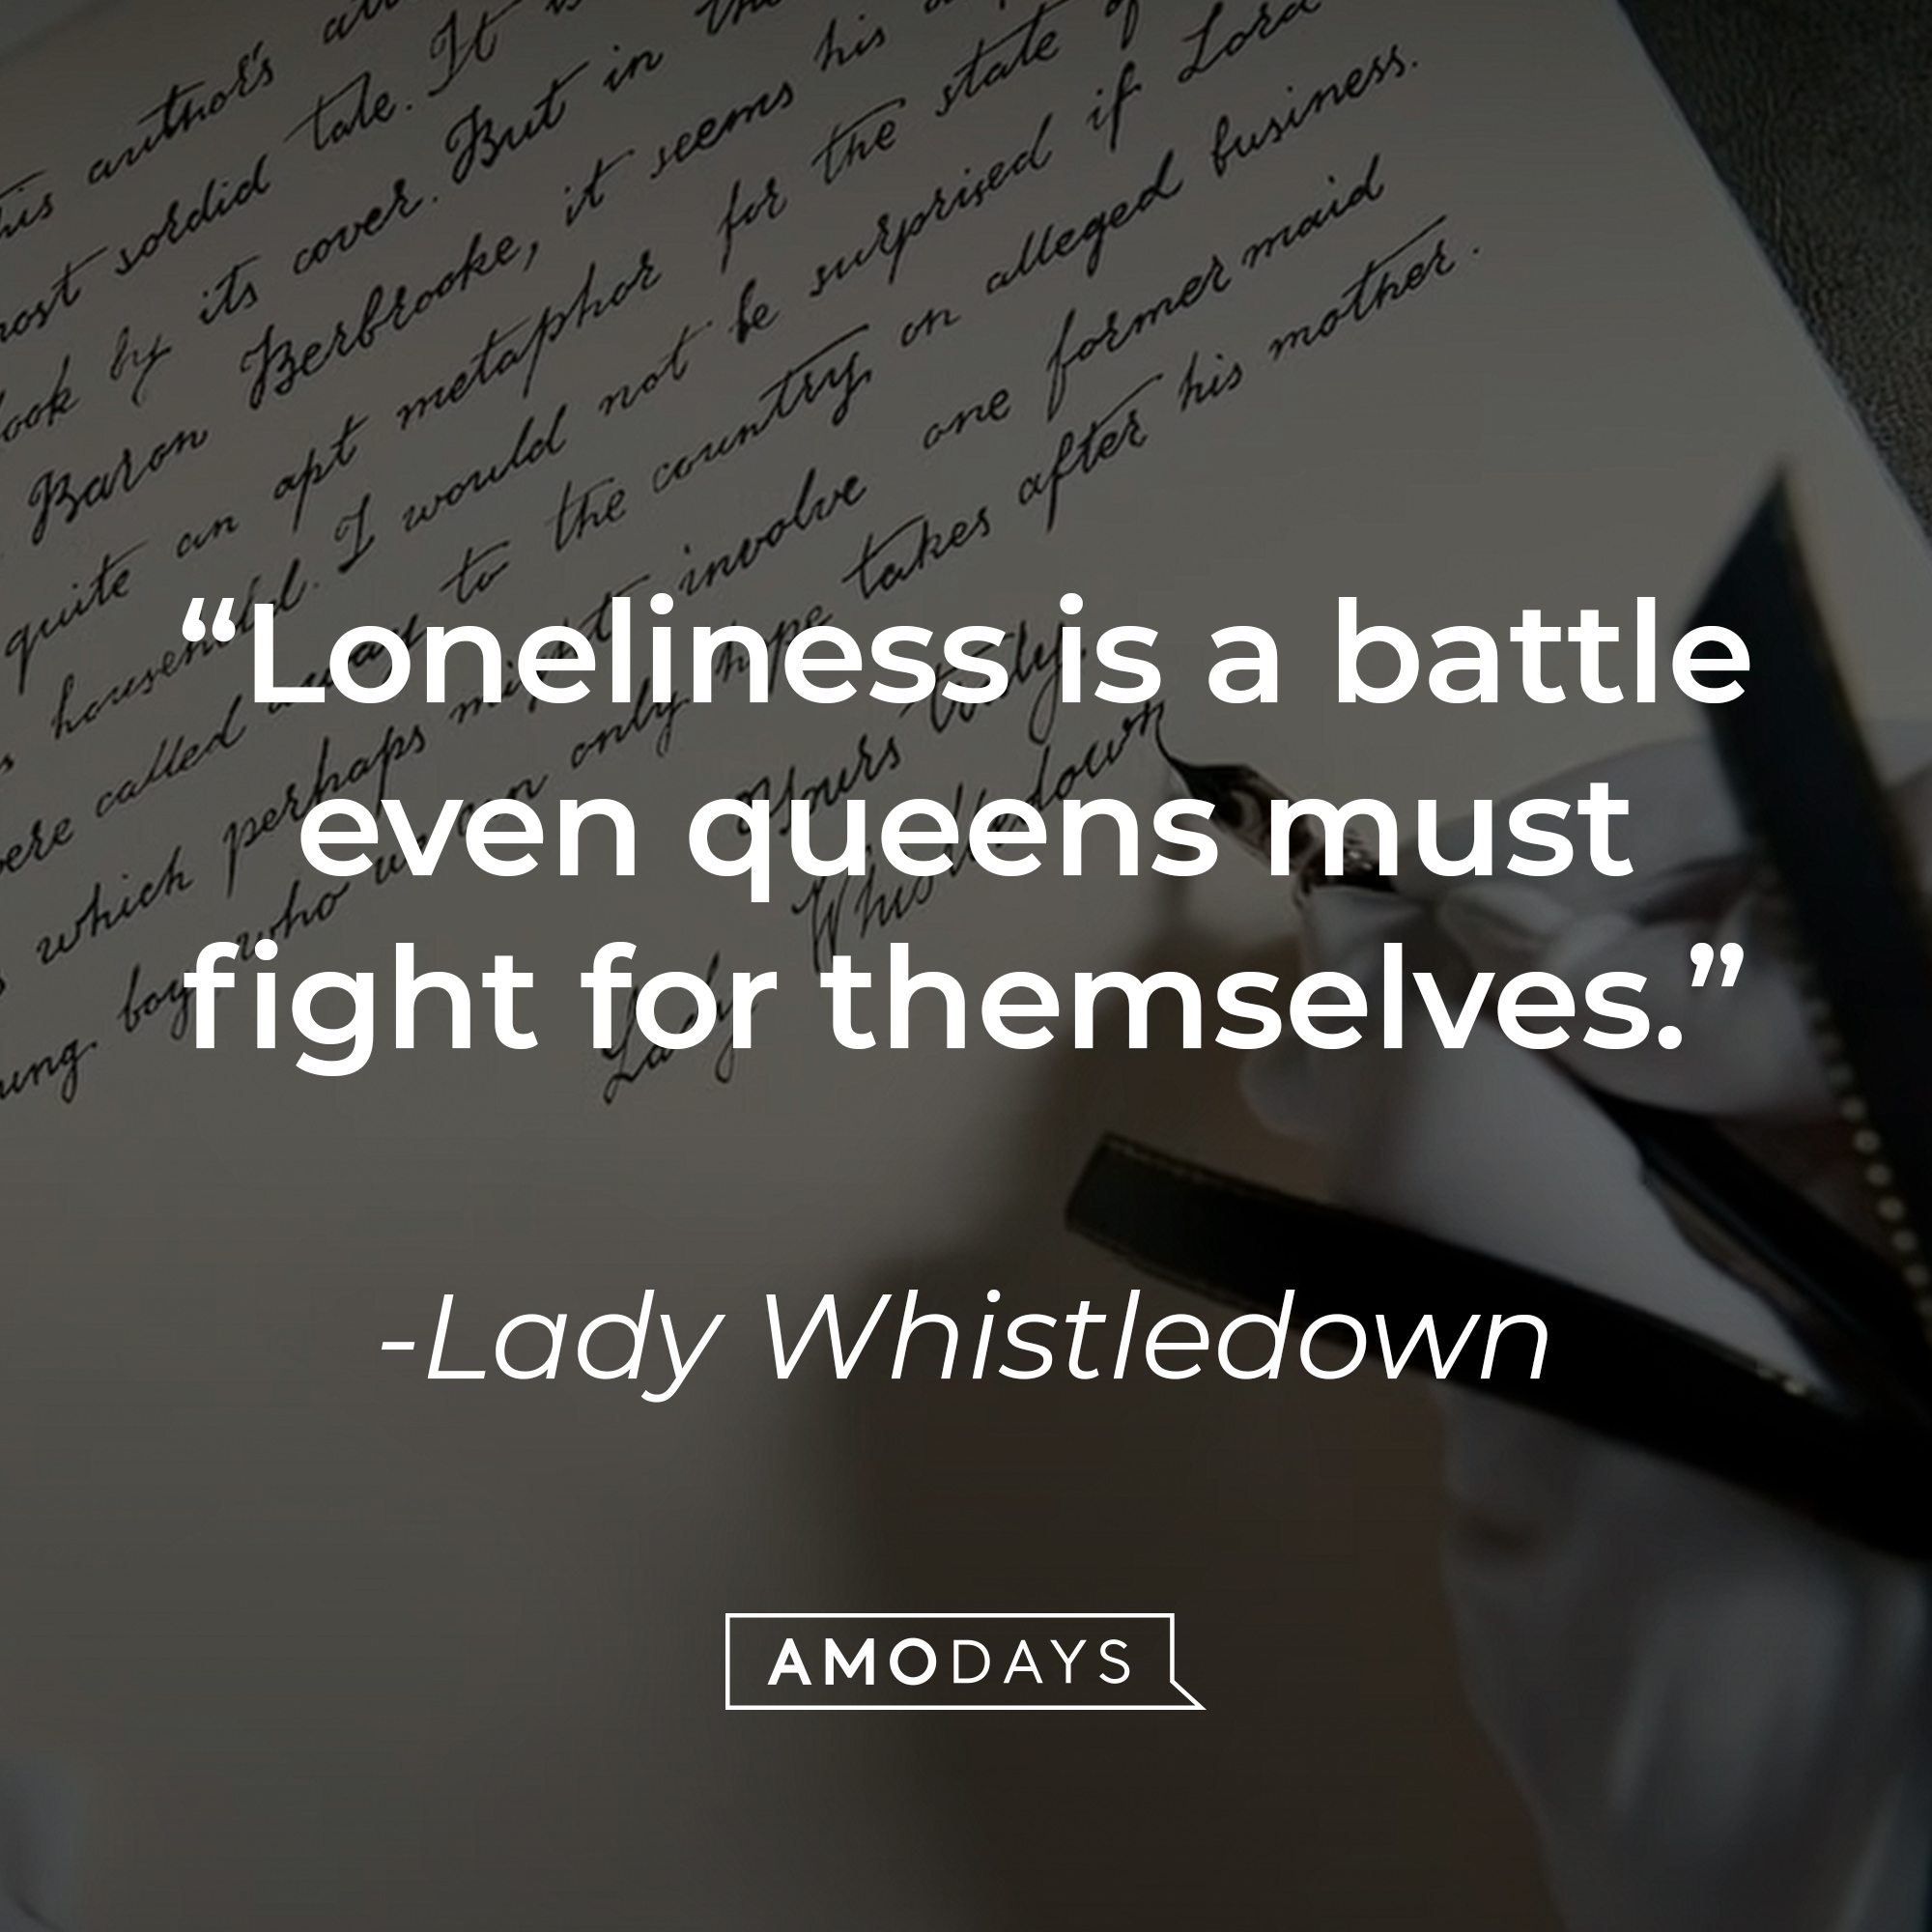 Lady Whistledown's quotes: "Loneliness is a battle even queens must fight for themselves." | Source: Youtube.com/Netflix